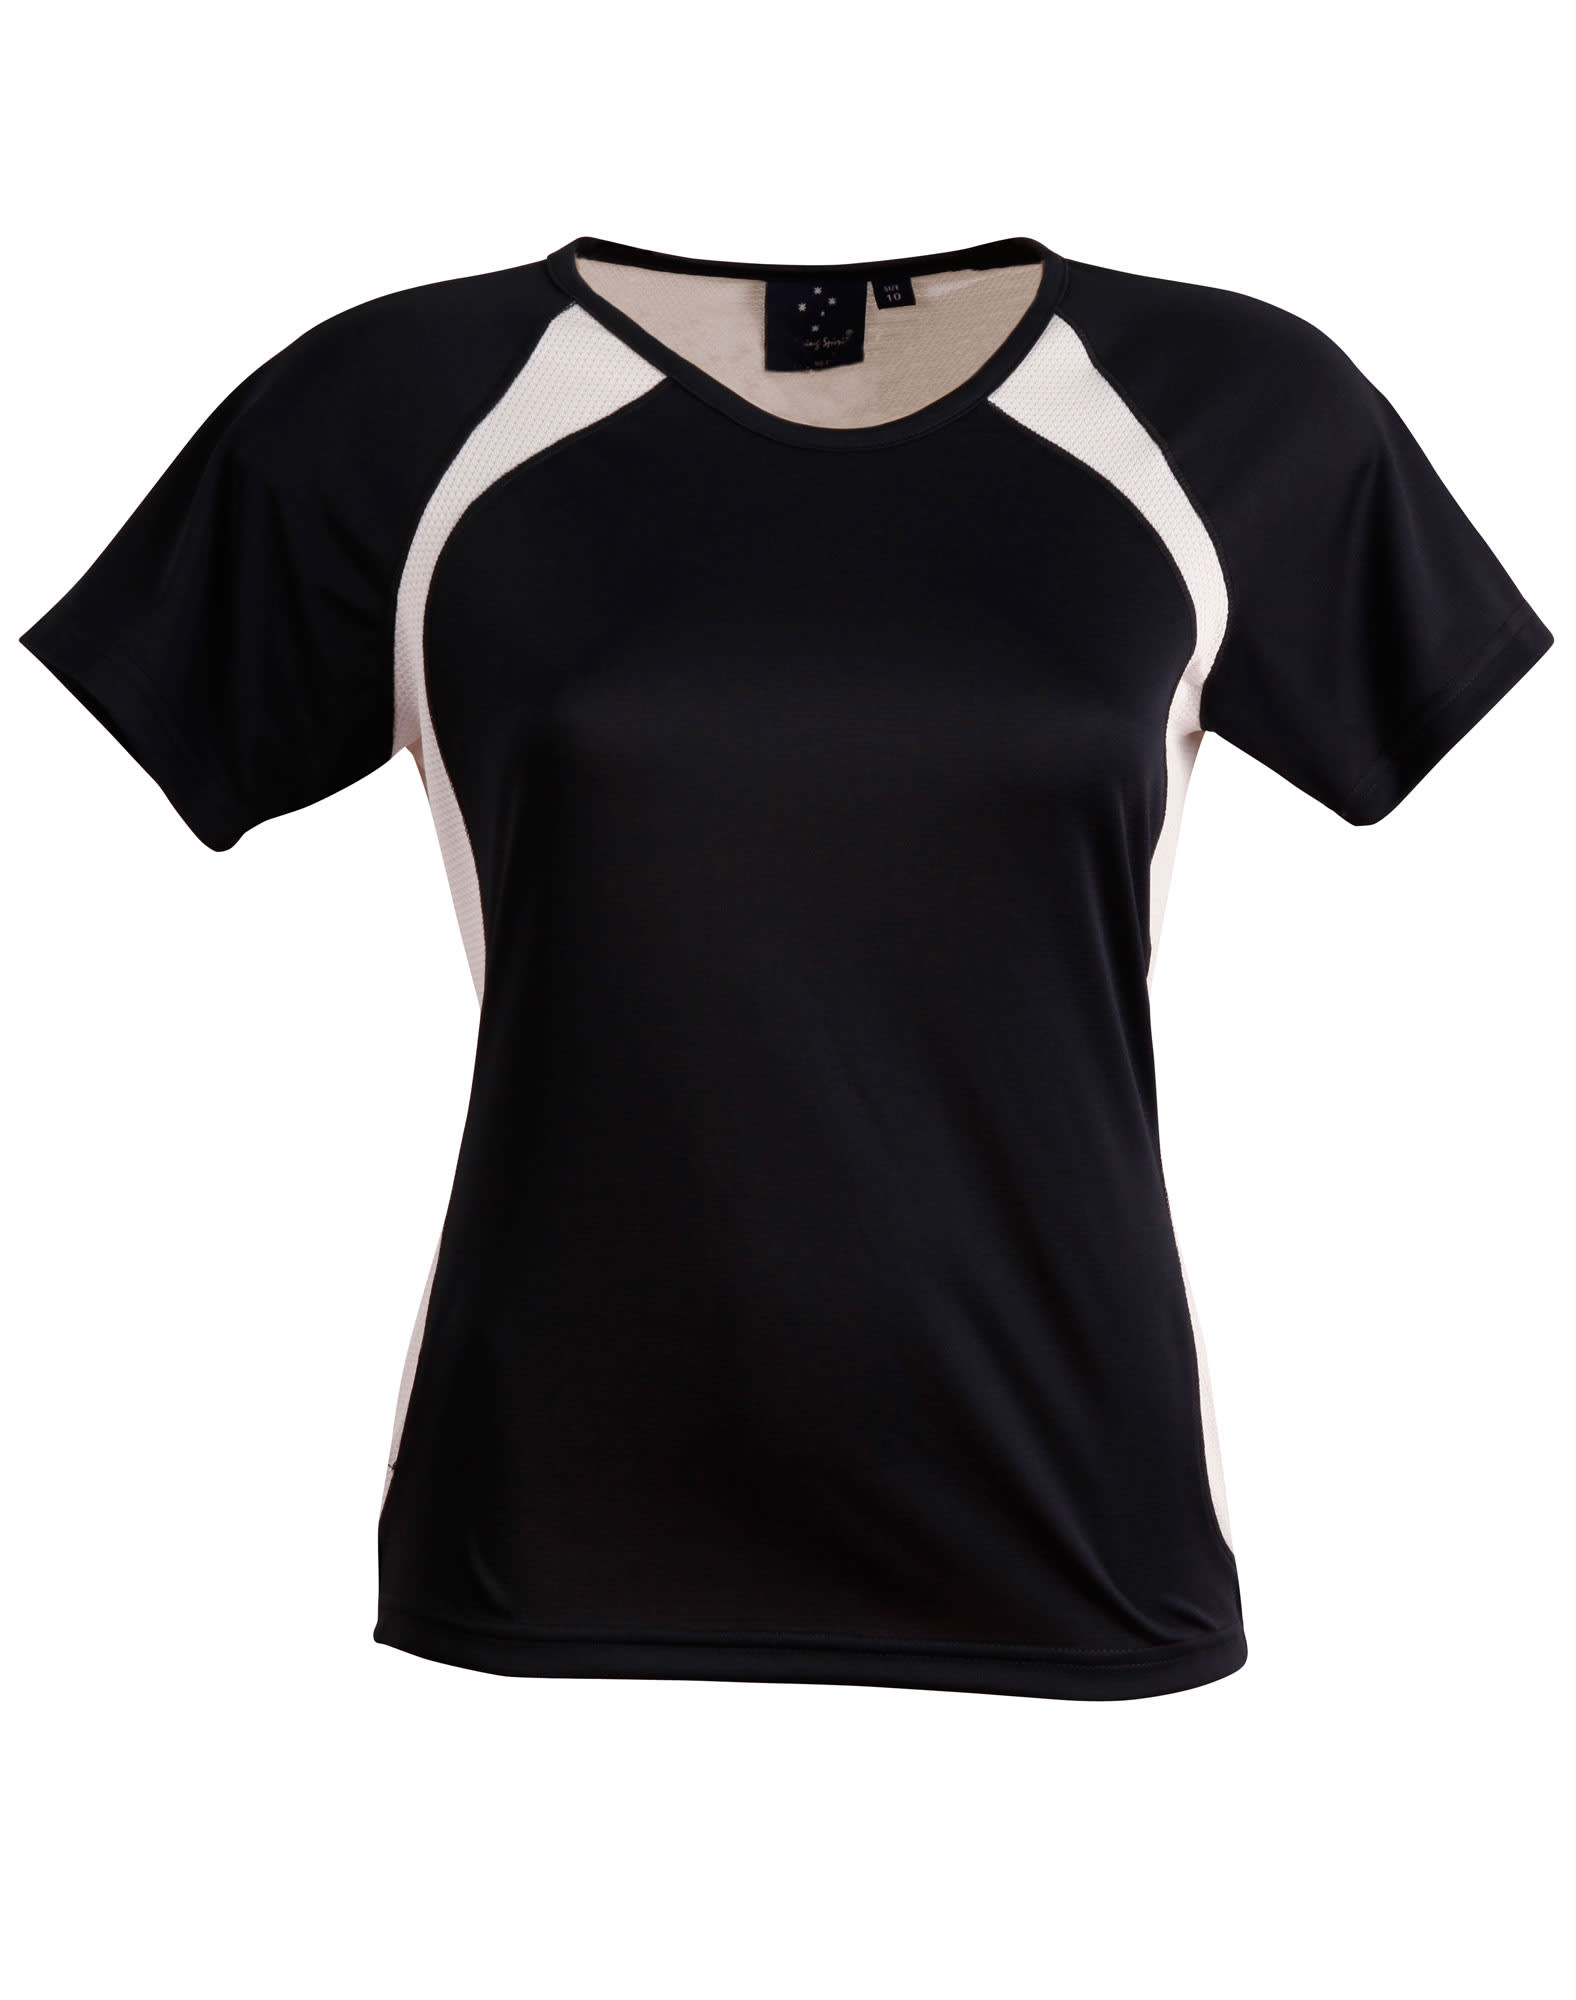 Ladies CoolDry Athletic Tee Shirt TS72 | Navy/White